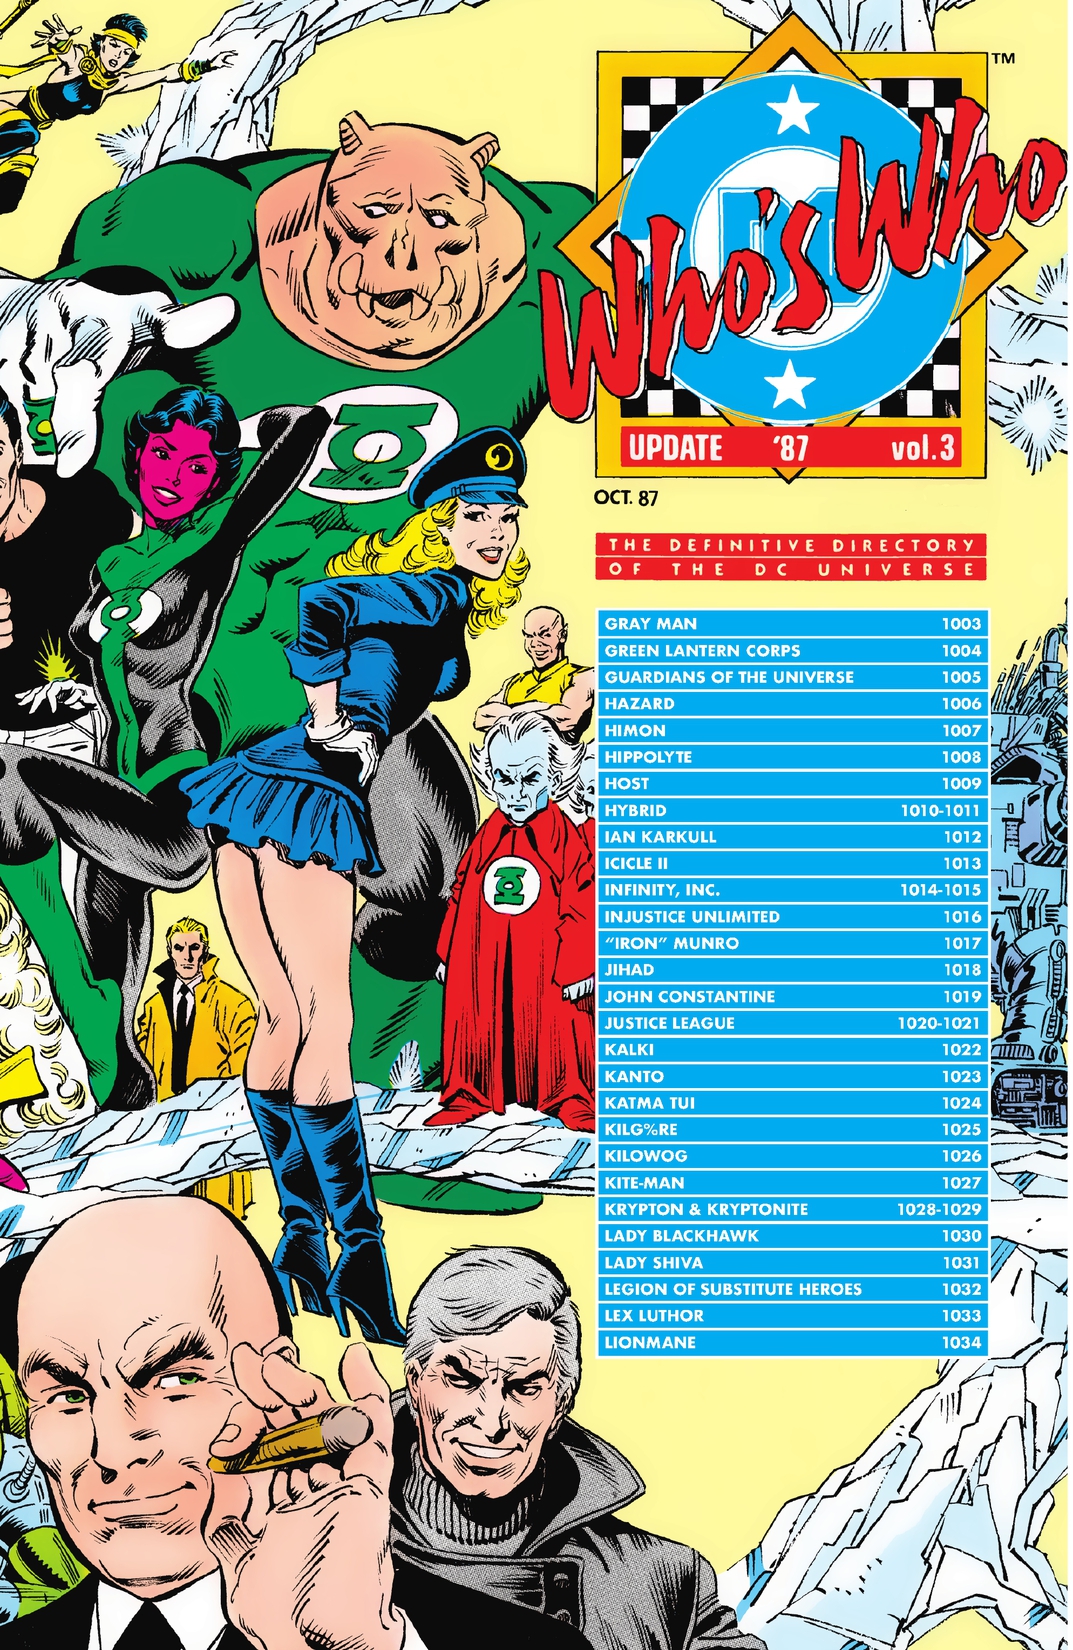 Who's Who Update 1987 #3 preview images